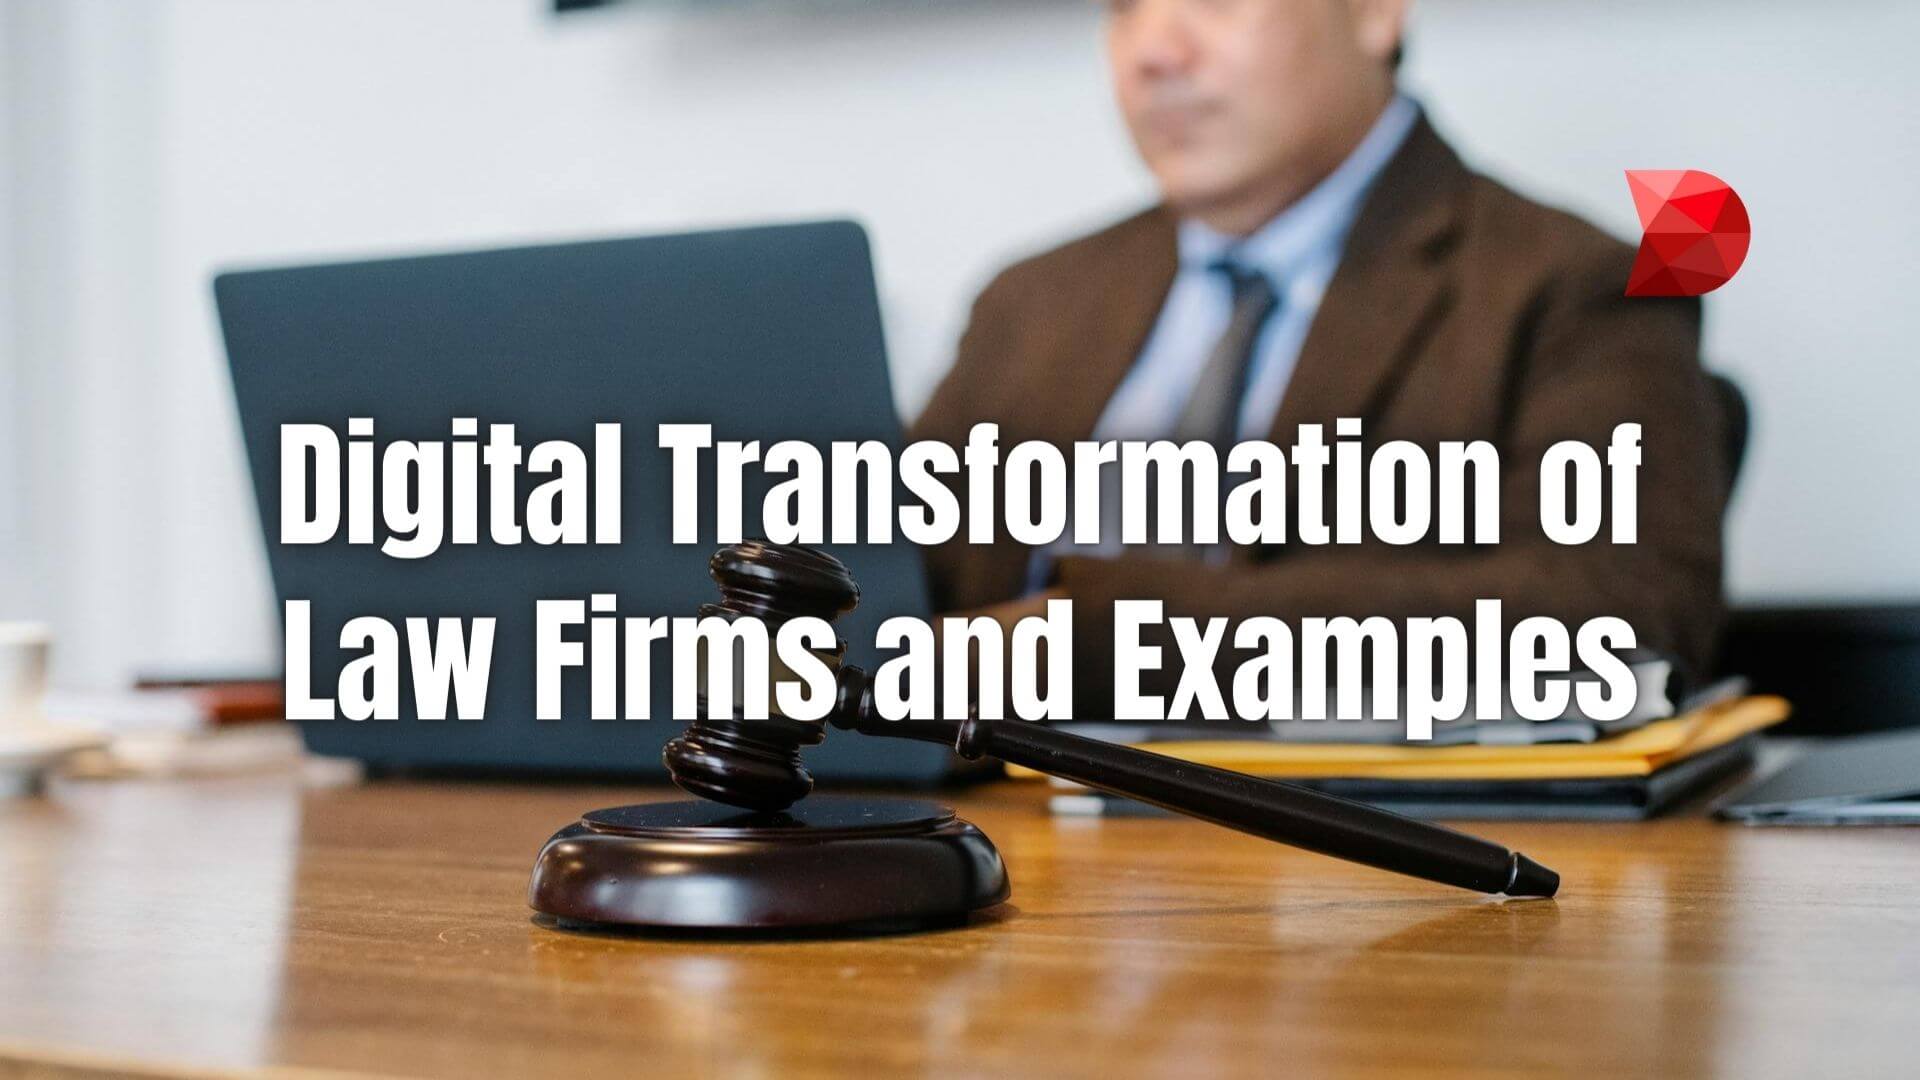 Unlock the potential of digital transformation in law firms with our complete guide. Explore real-world examples and strategies for success.